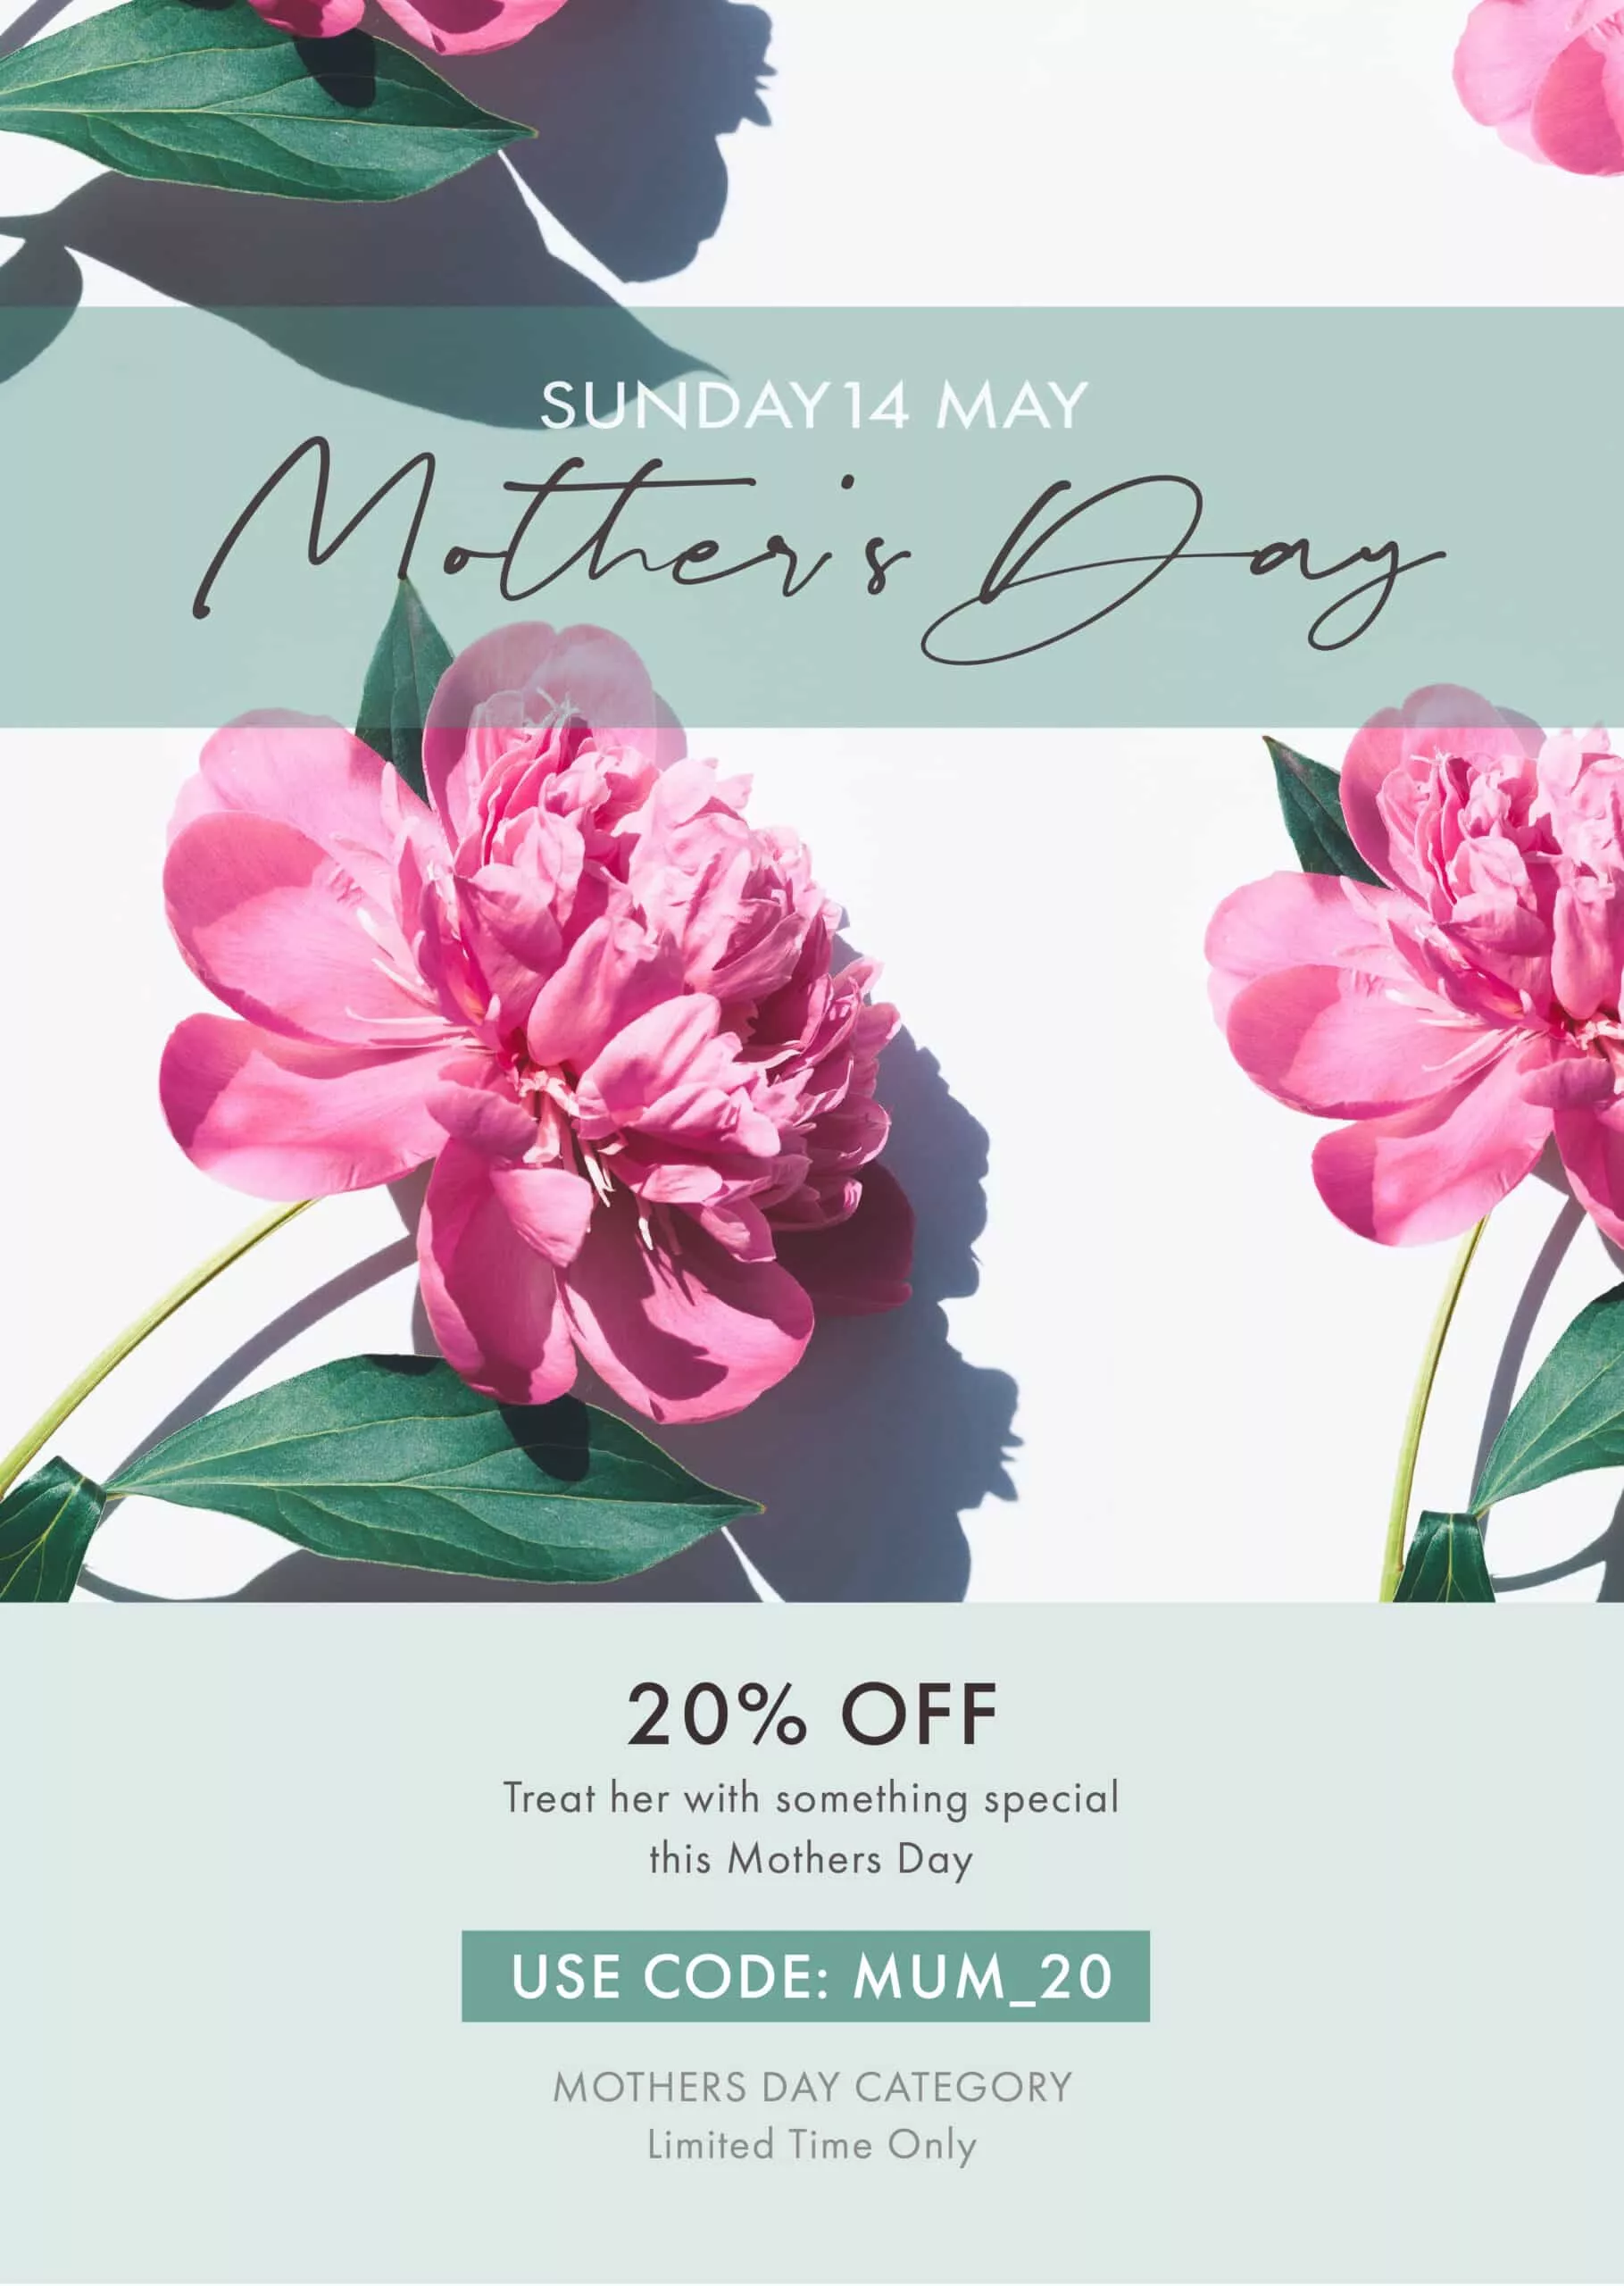 MOTHERS DAY ONLINE SALE